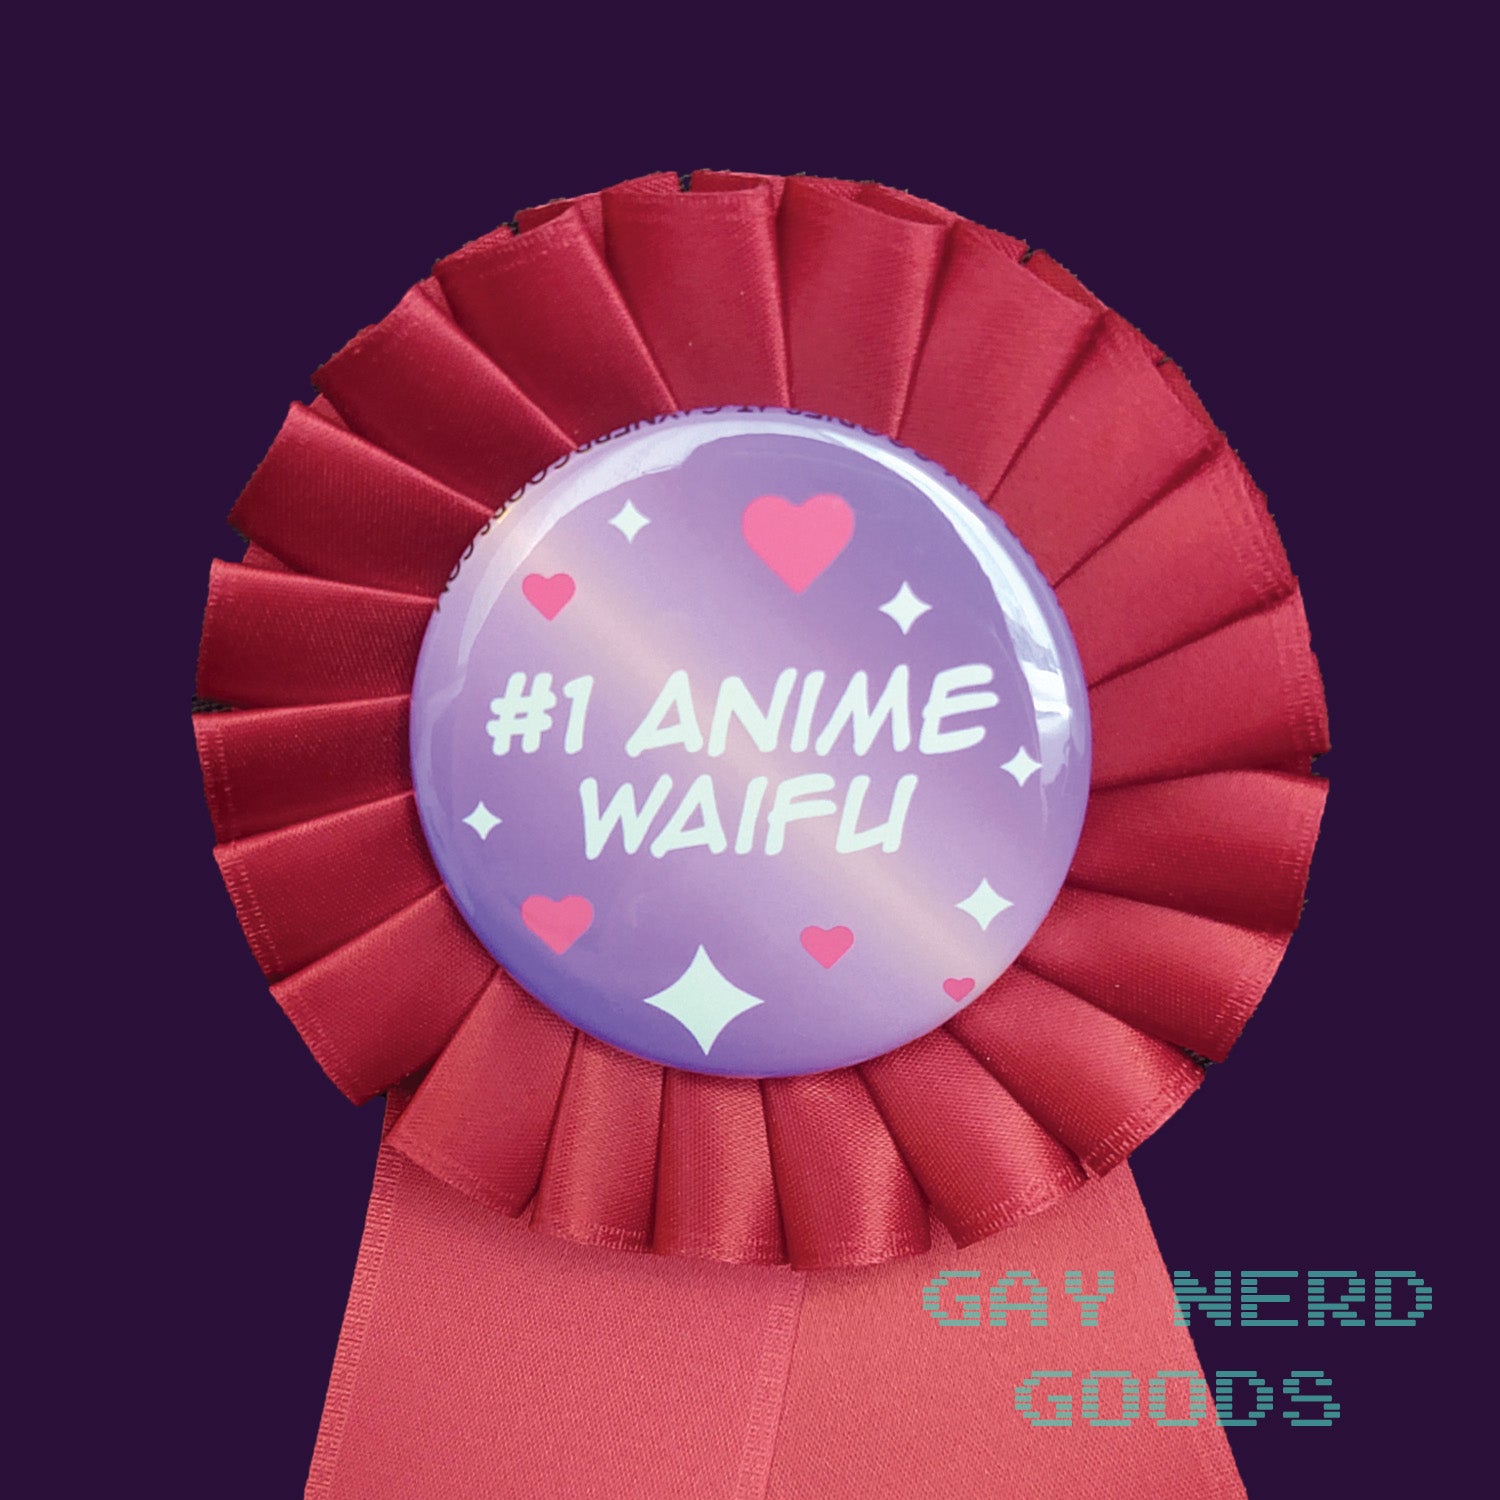 close up view of the #1 anime waifu award rosette. The text is white and surrounded by pink hearts and sparkles on a purple and pink gradient background. The ribbon is a bright dark red